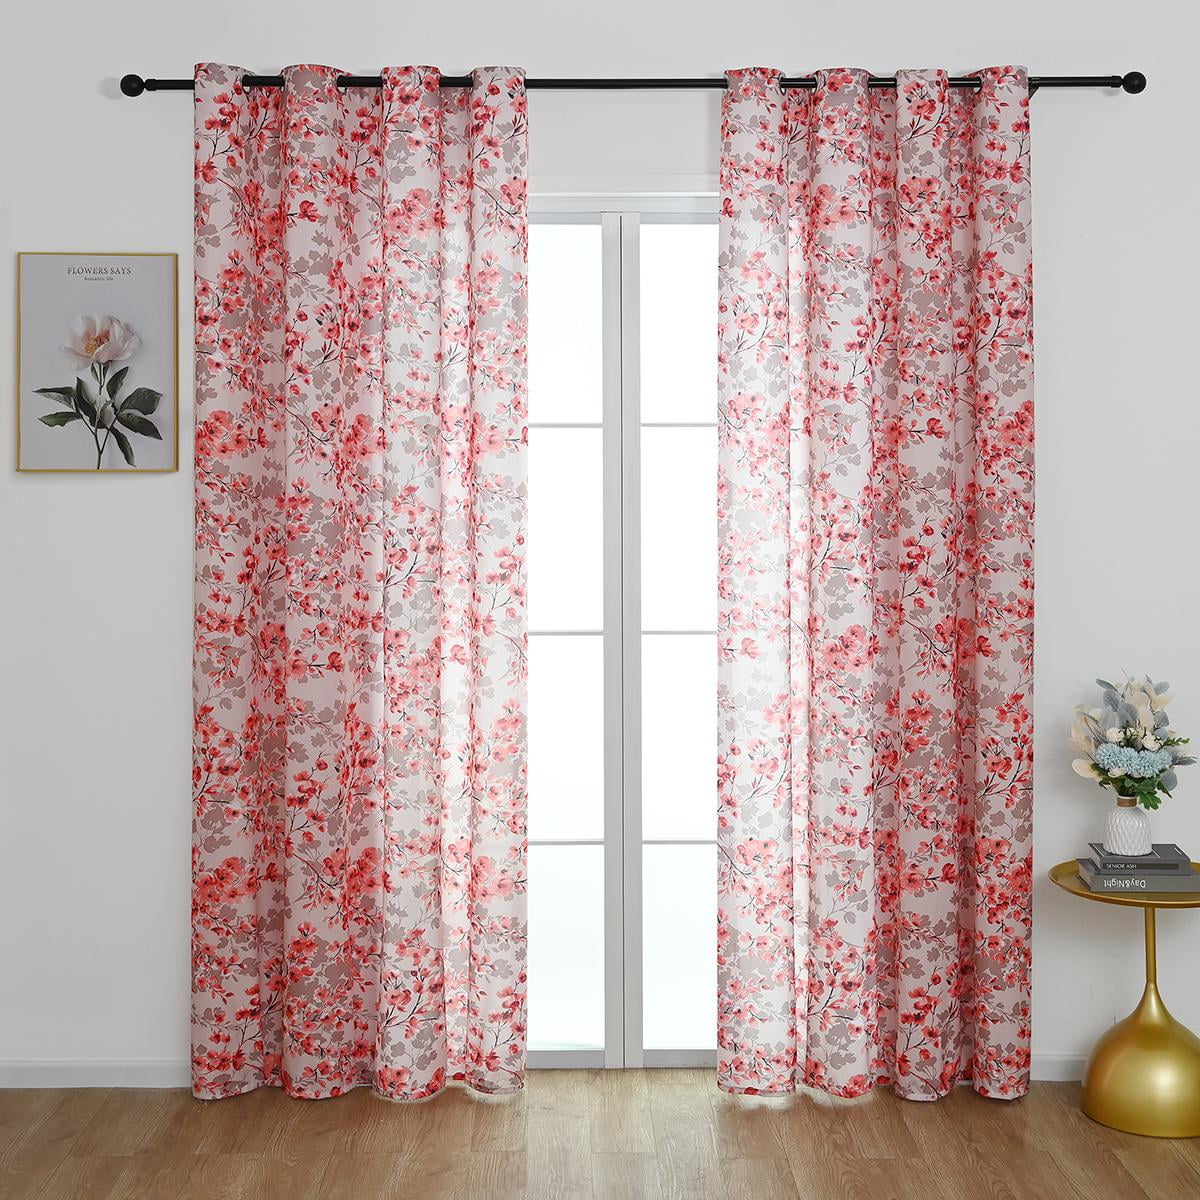 Details about   1/2 Panel Window Curtain Floral Drapes Furniture Cover Eyelets Home Room Decor 